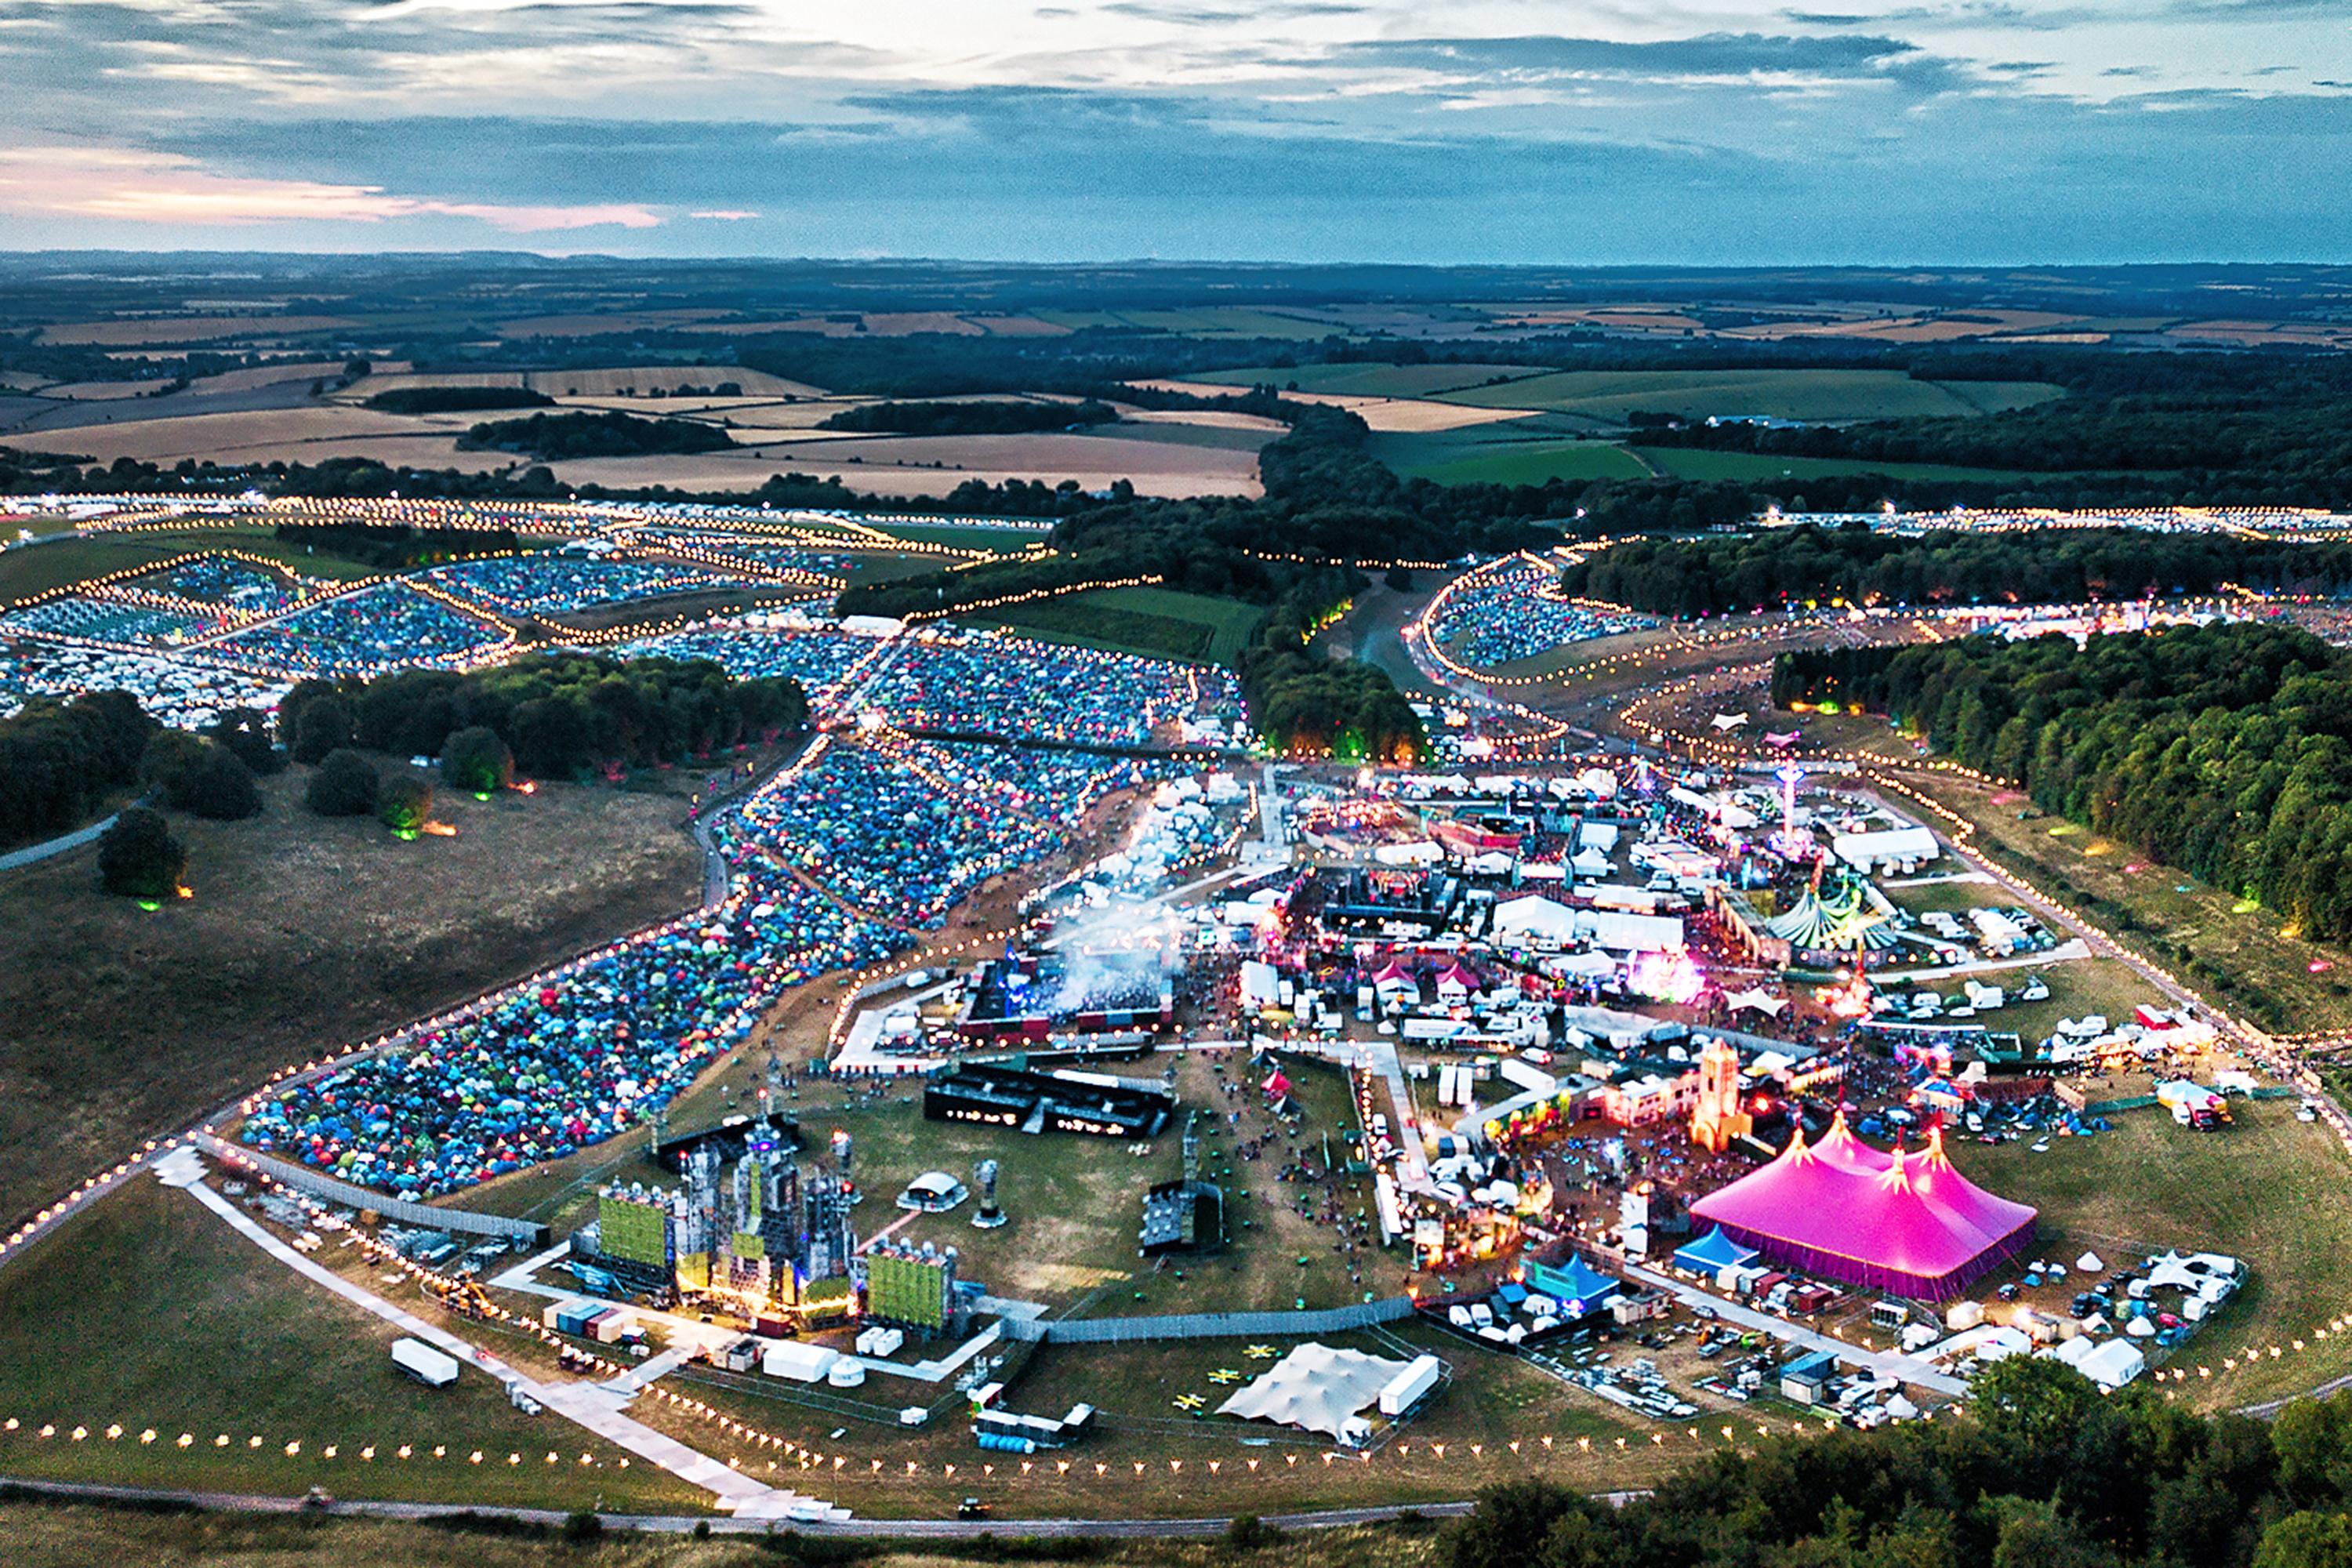 Boomtown Map 2019: Stages, Parking and Camping - Boomtown Source